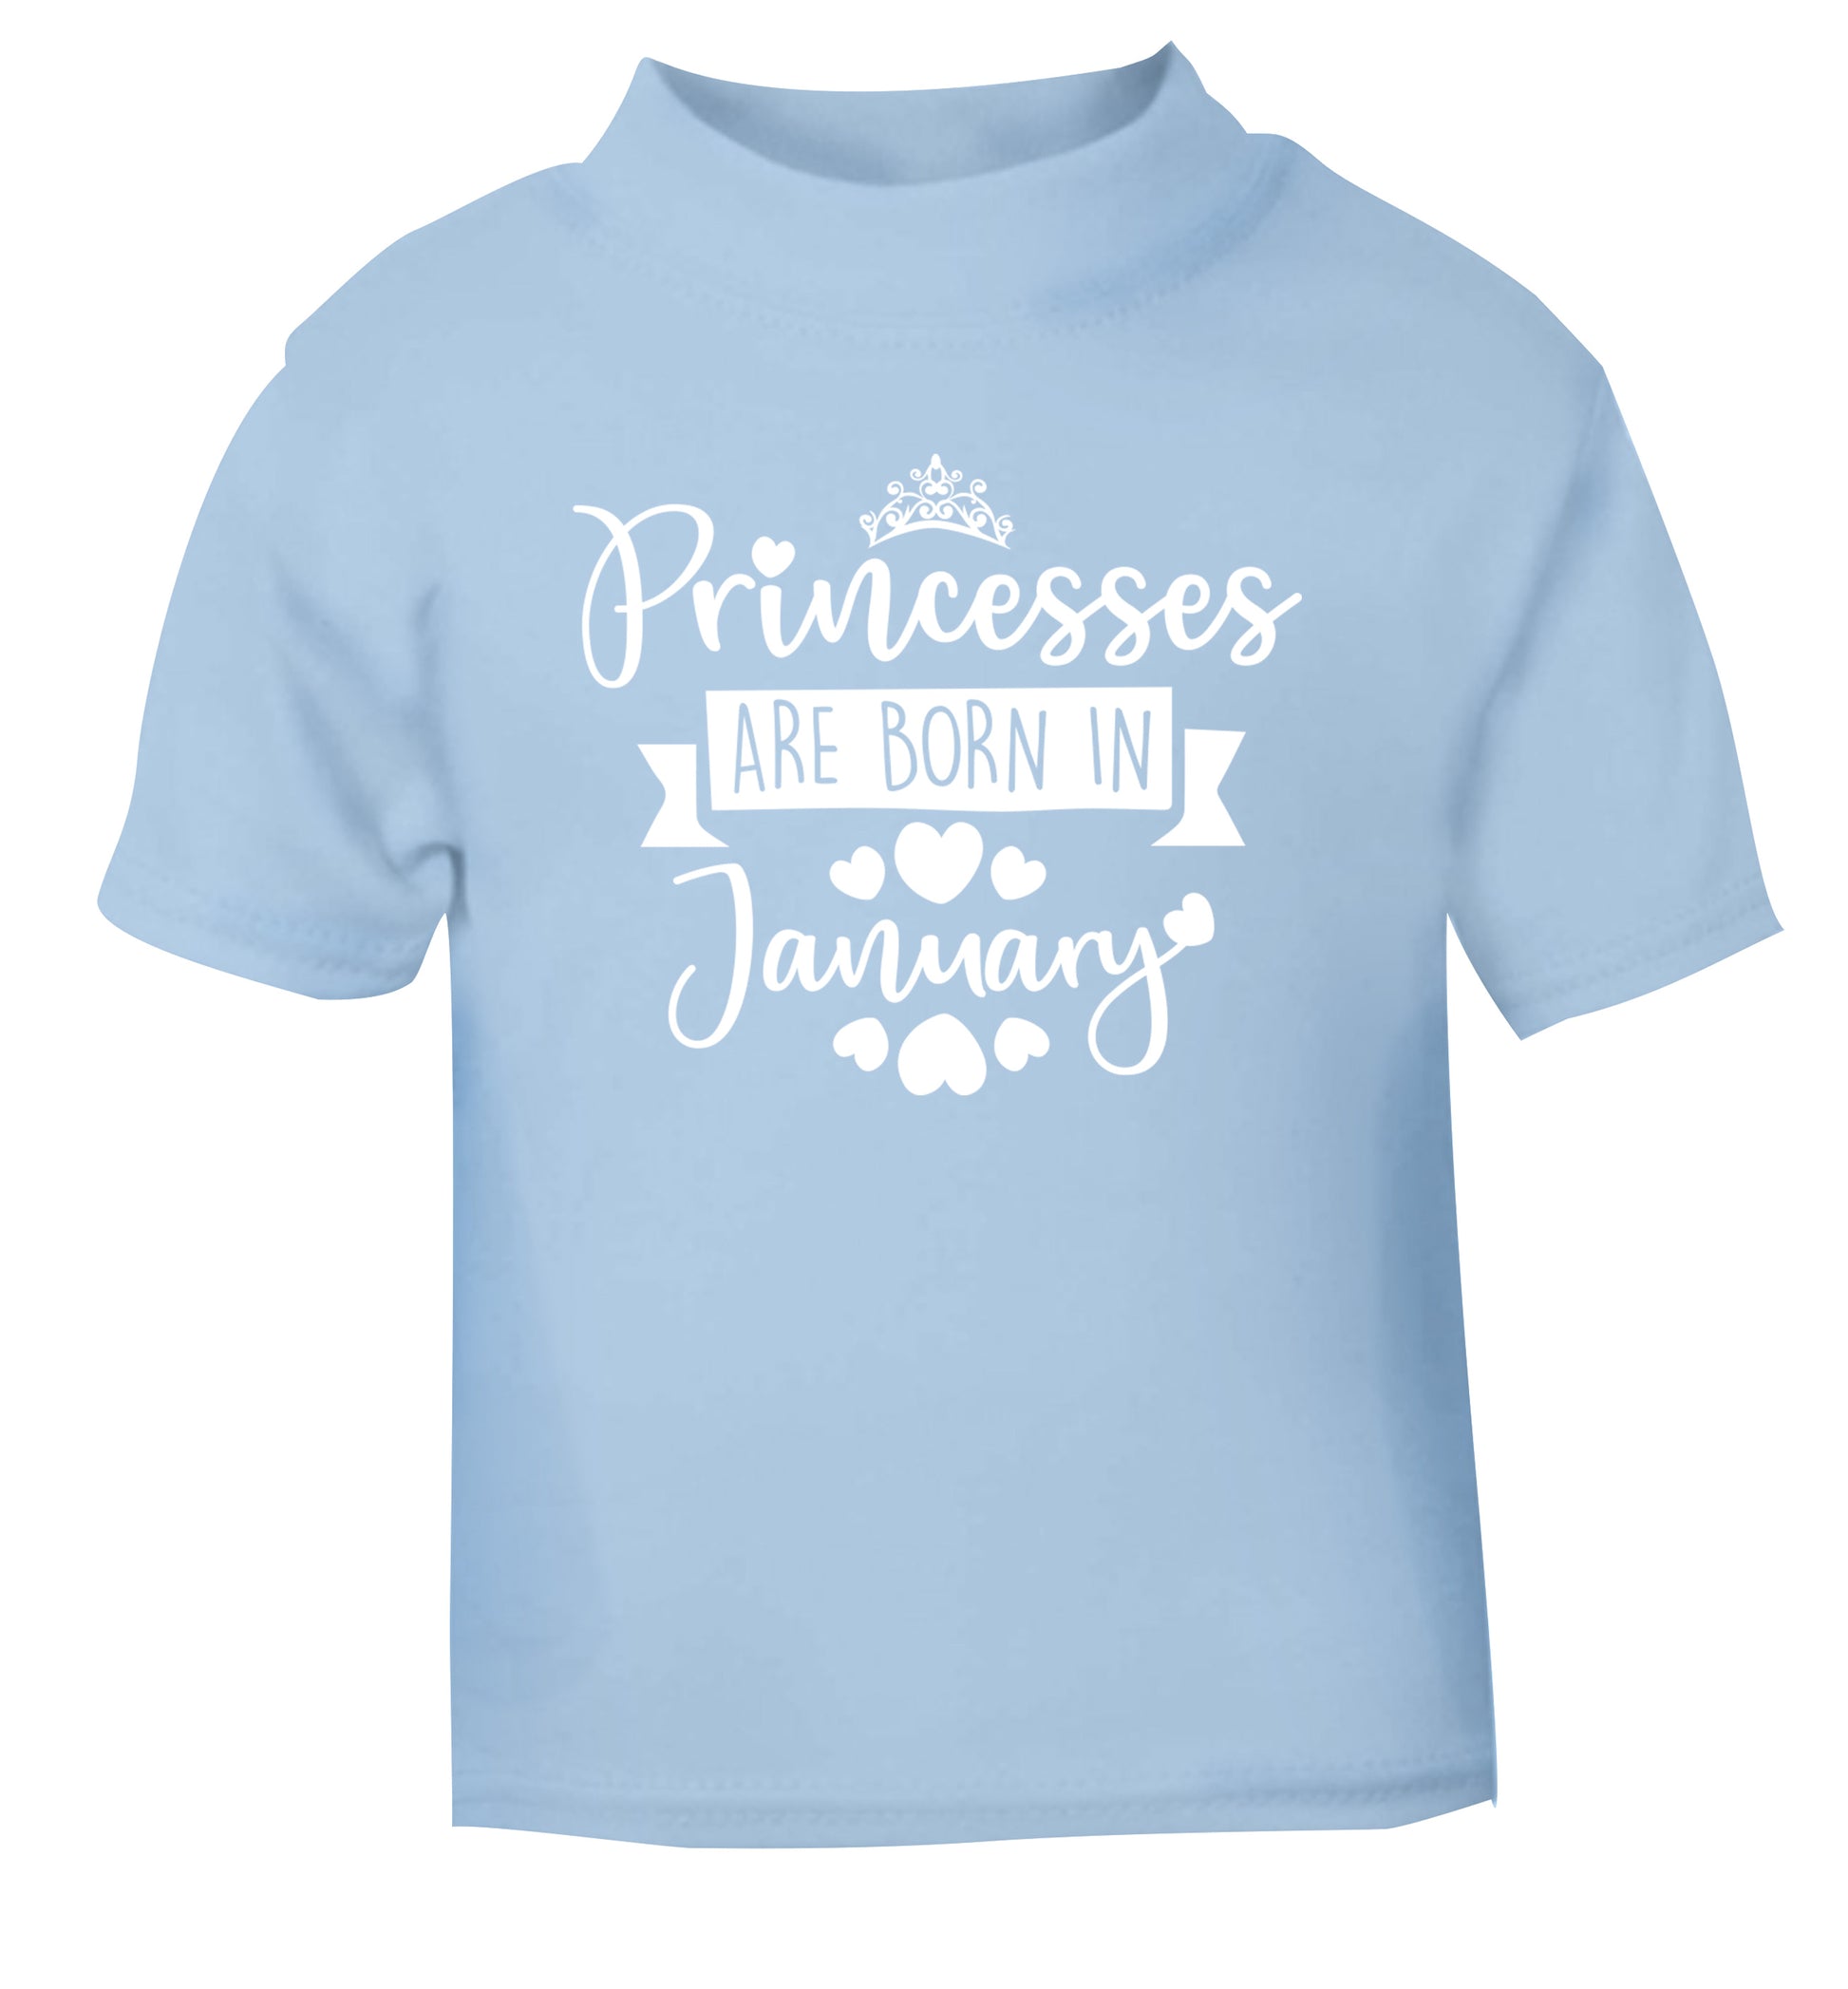 Princesses are born in January light blue Baby Toddler Tshirt 2 Years